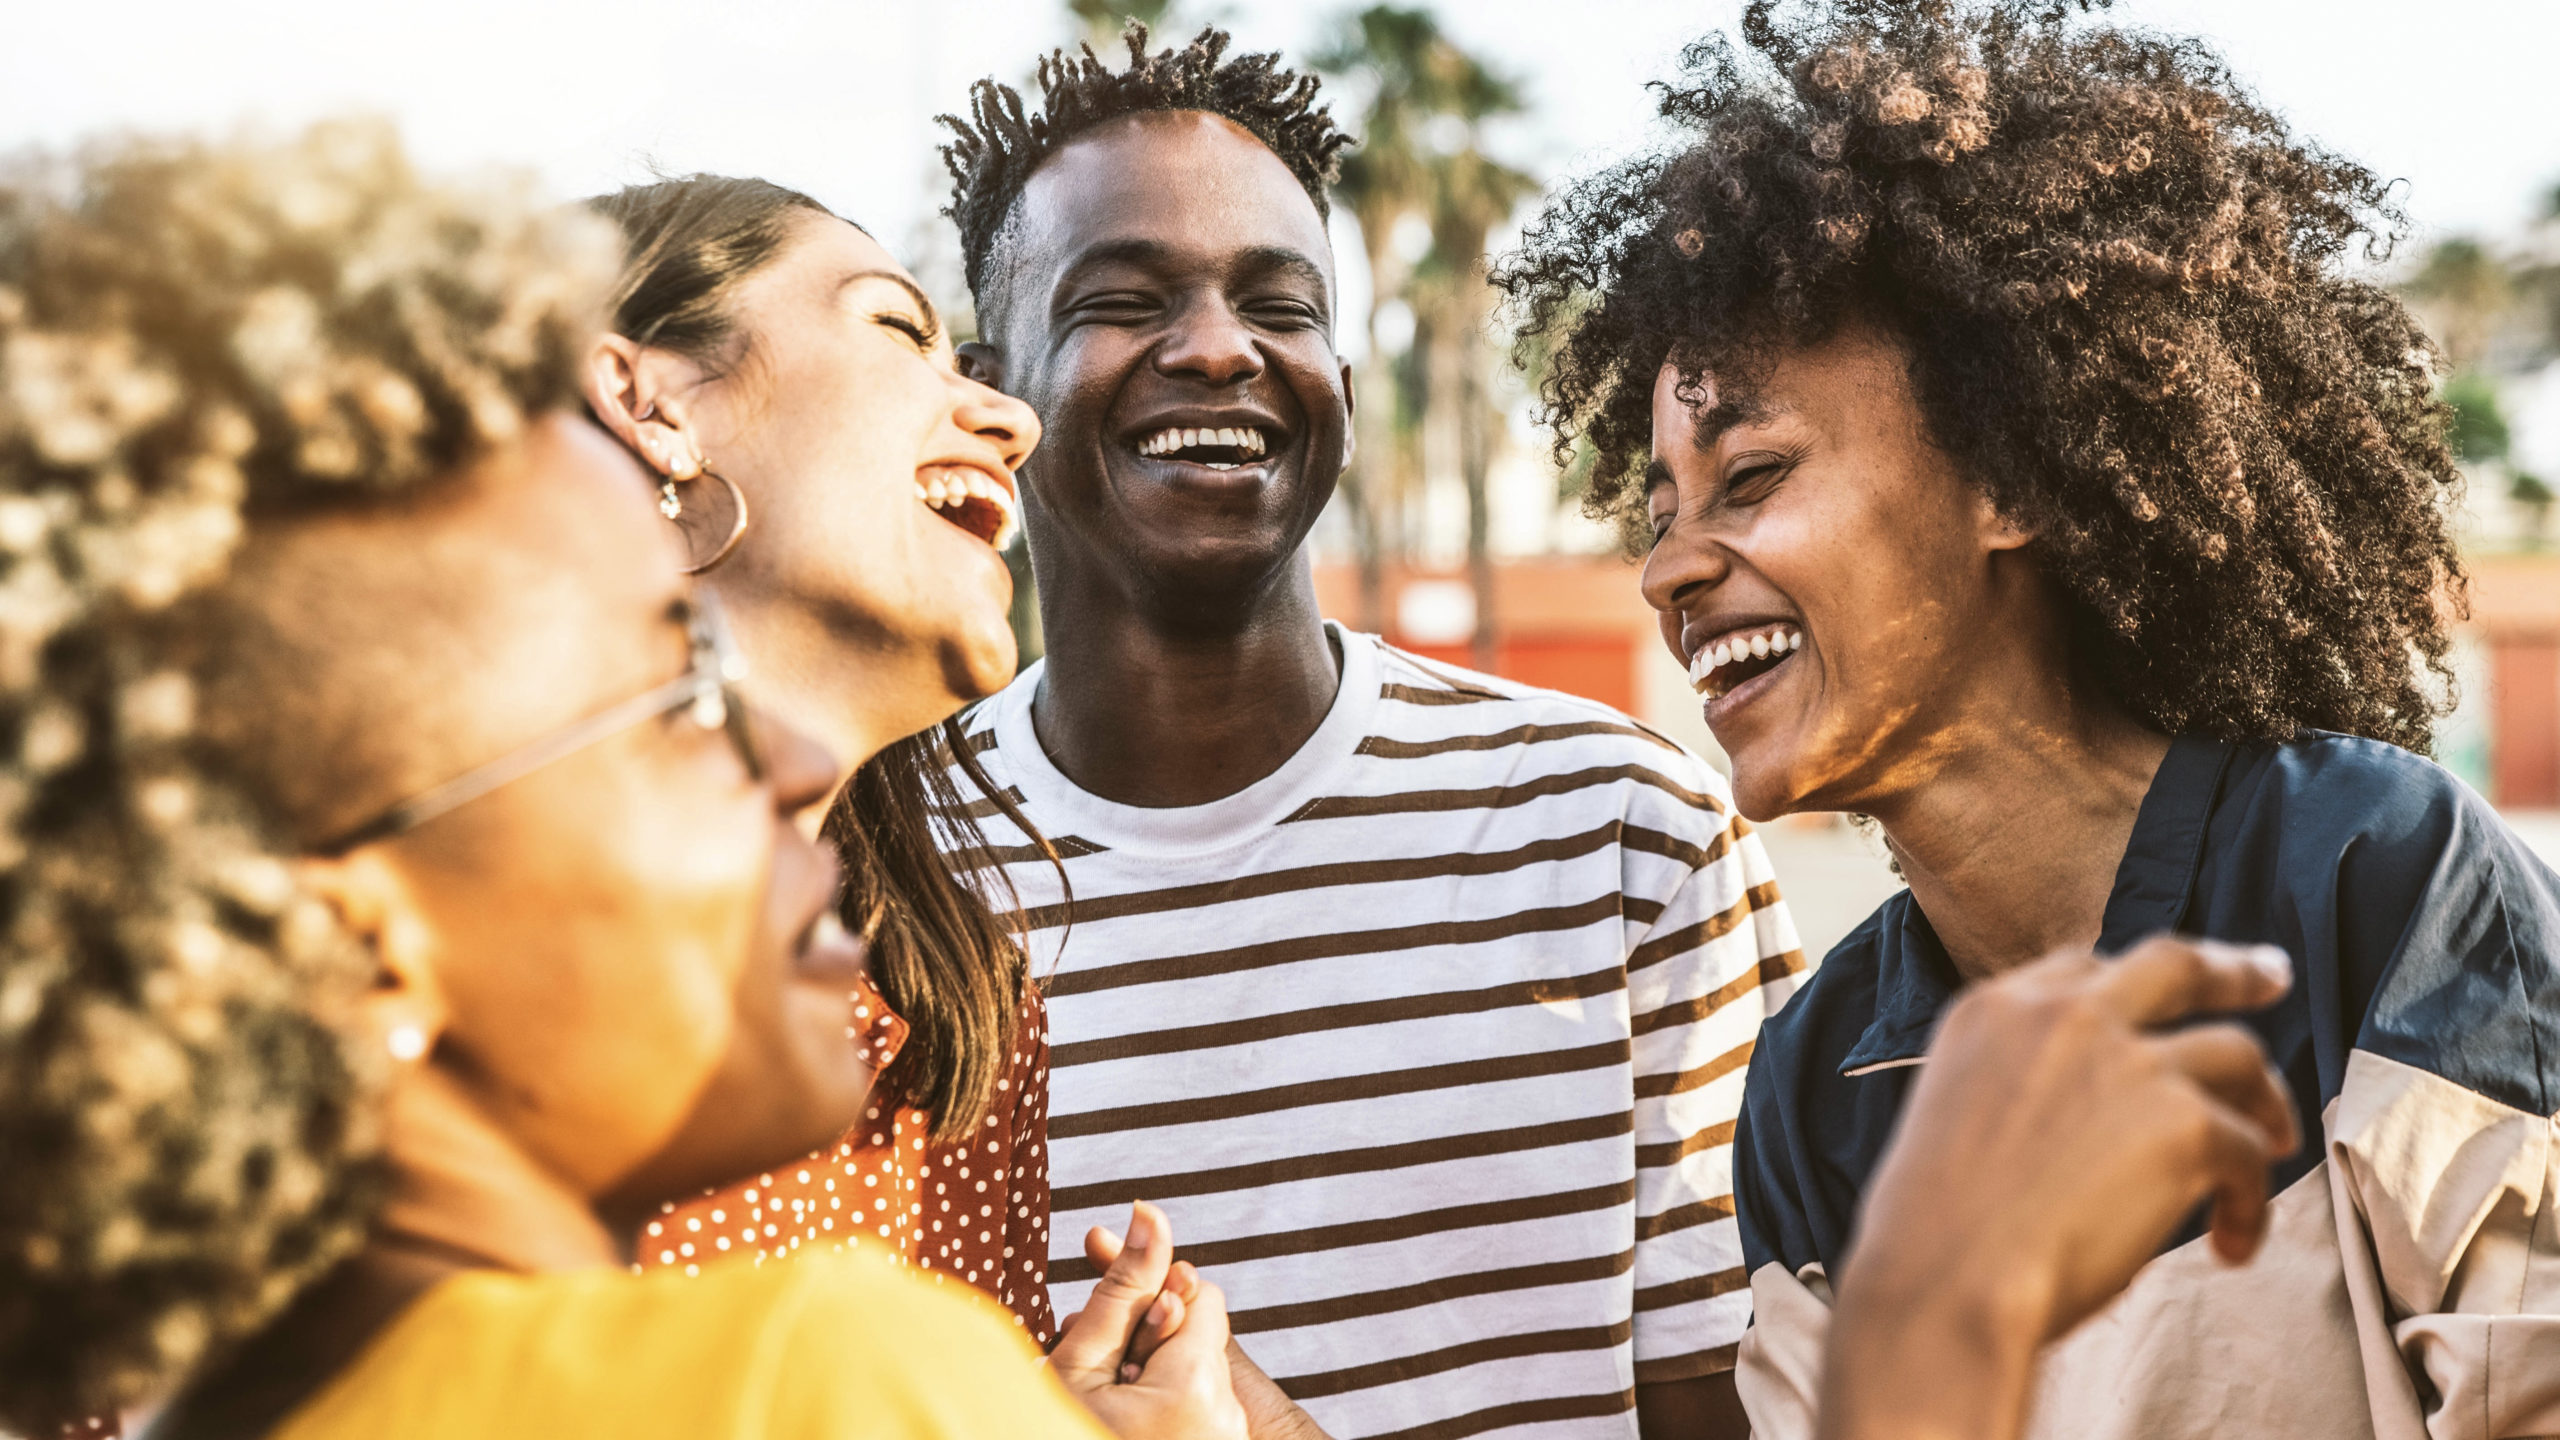 Young happy people laughing together - Multiracial friends group